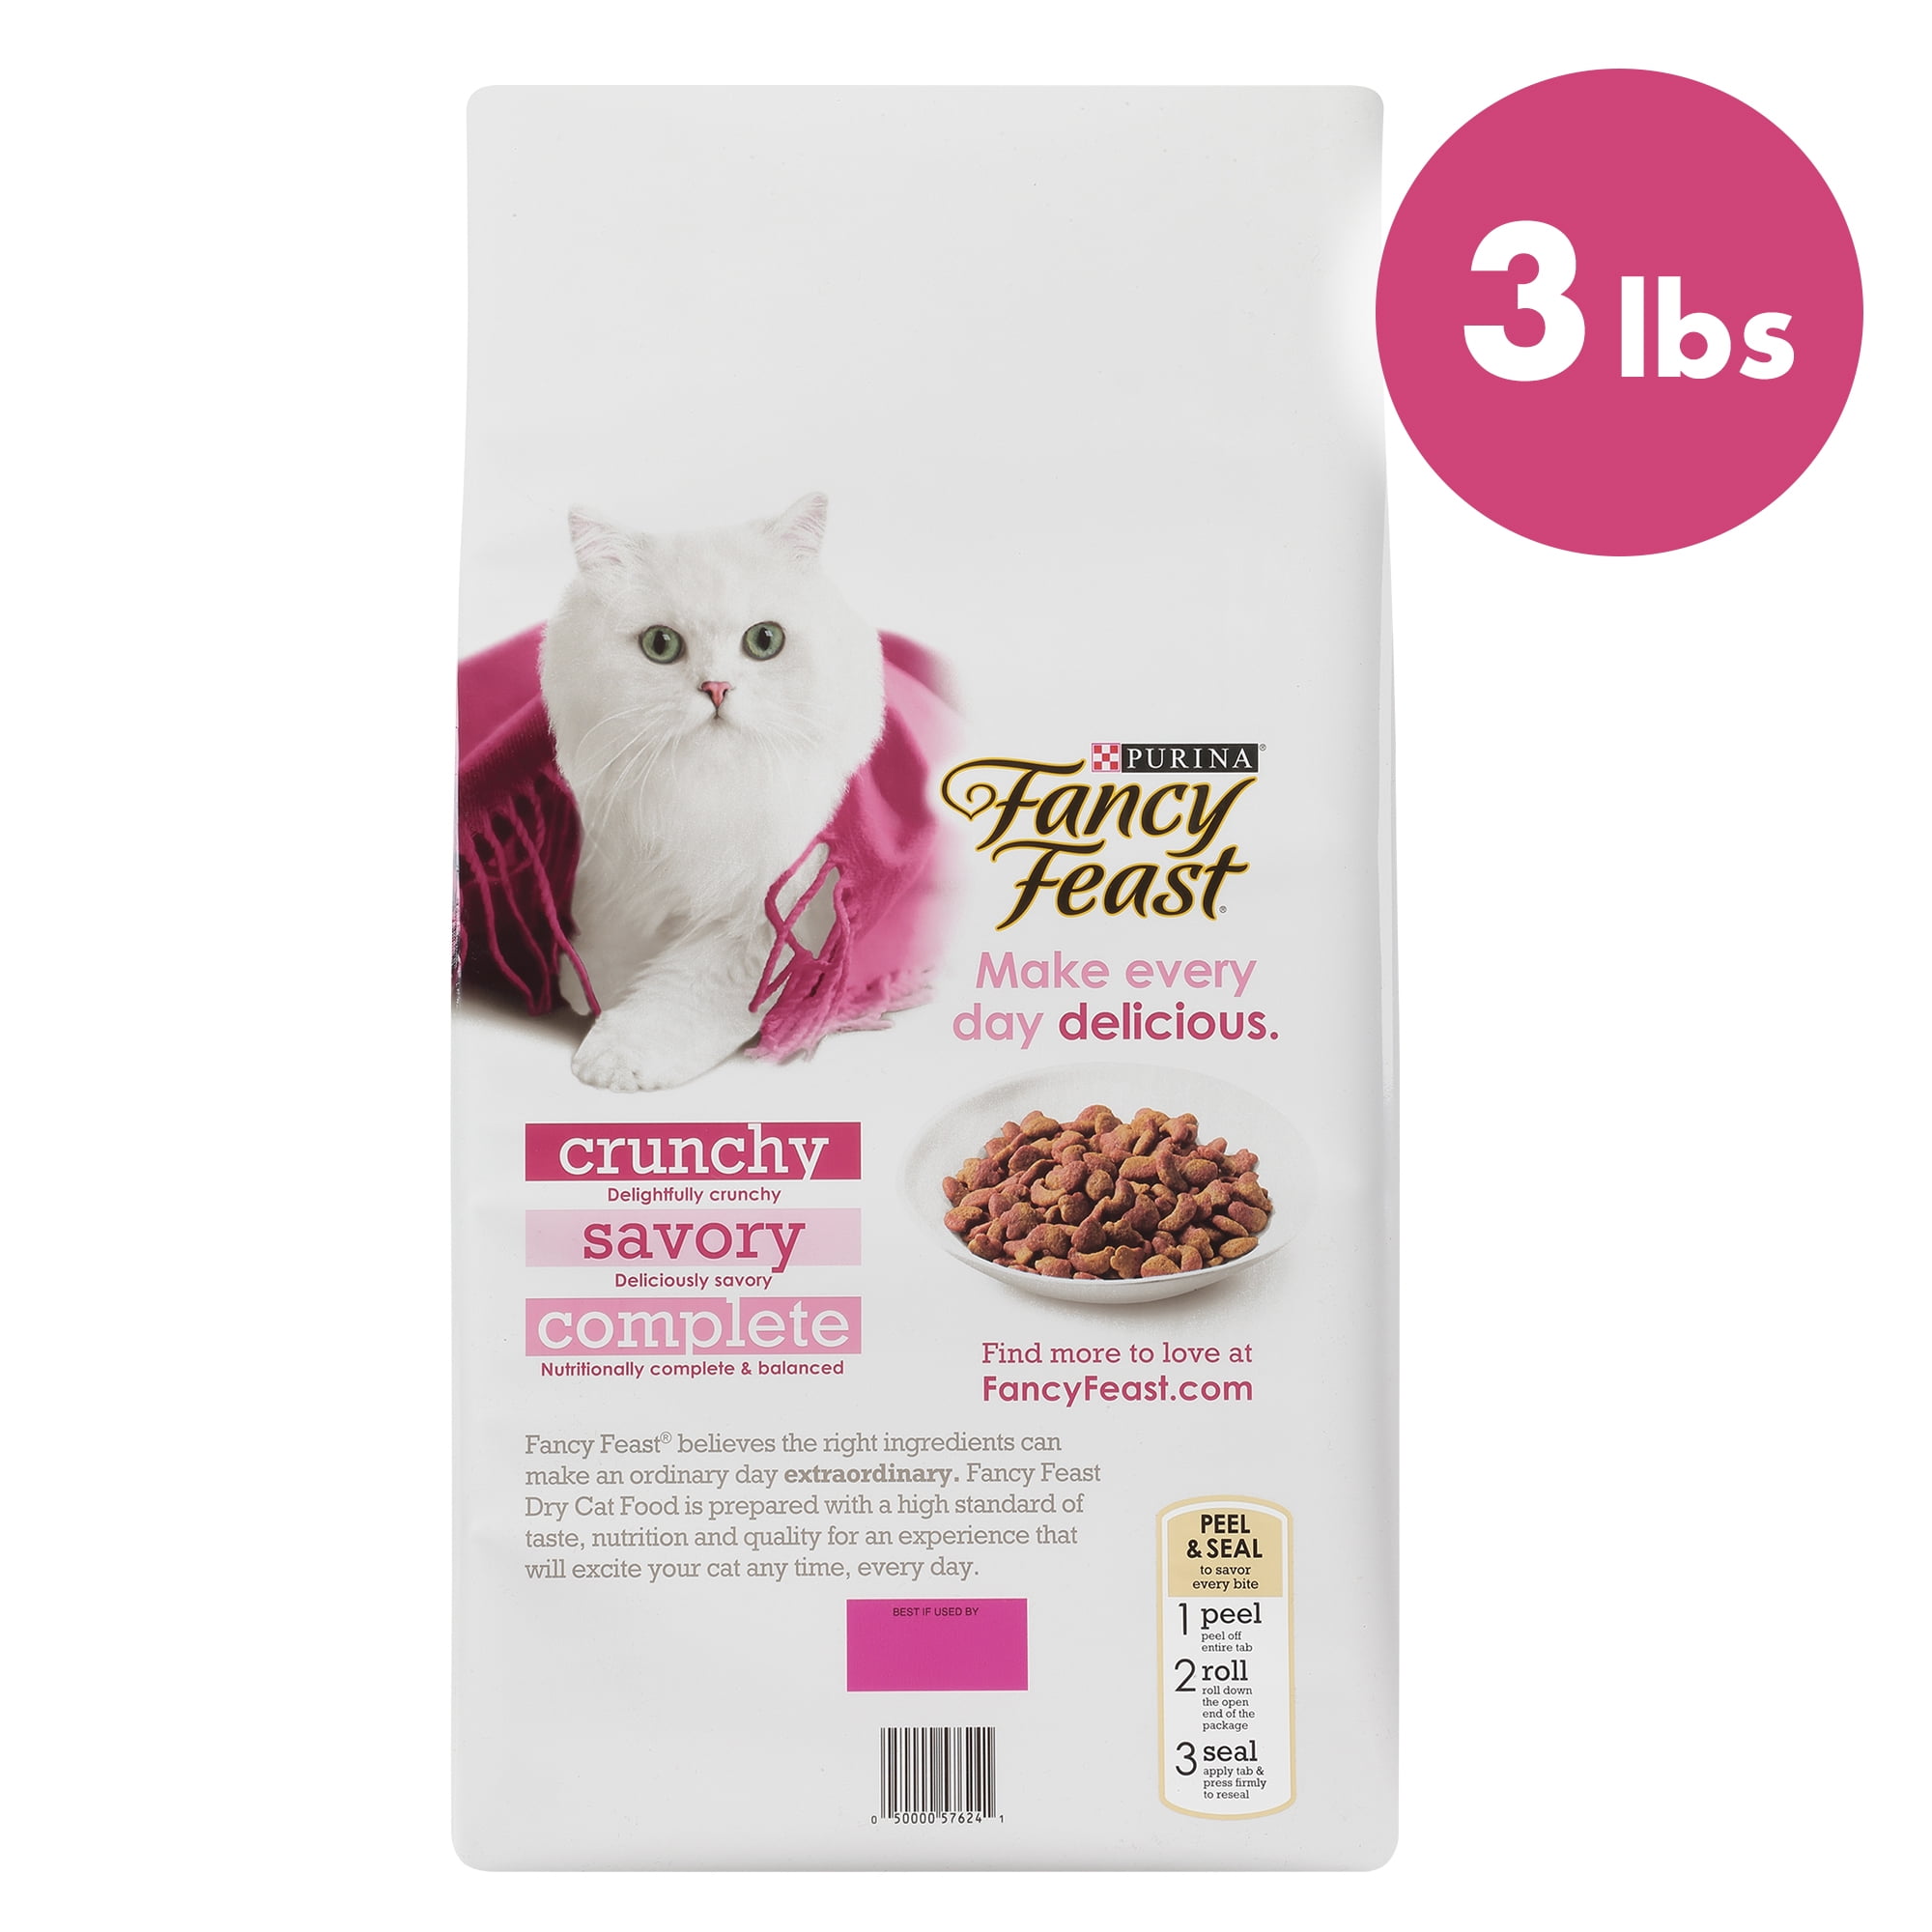 Purina Fancy Feast Dry Cat Food Reviews